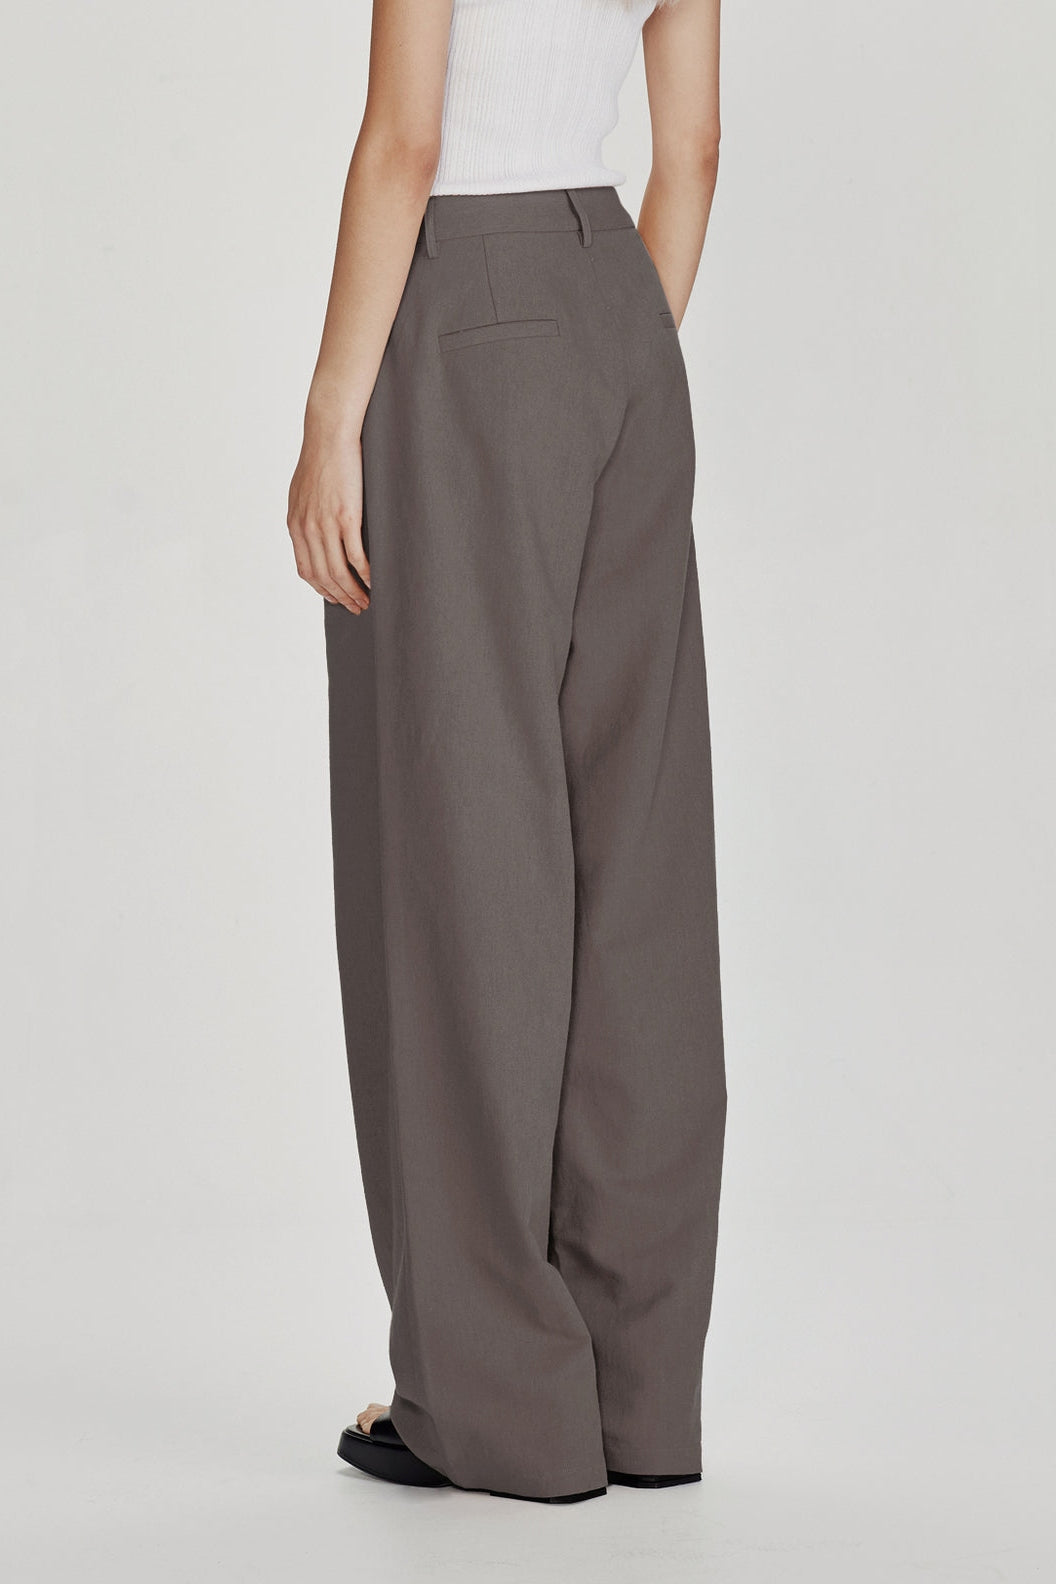 Commoners Linen Blend Trousers